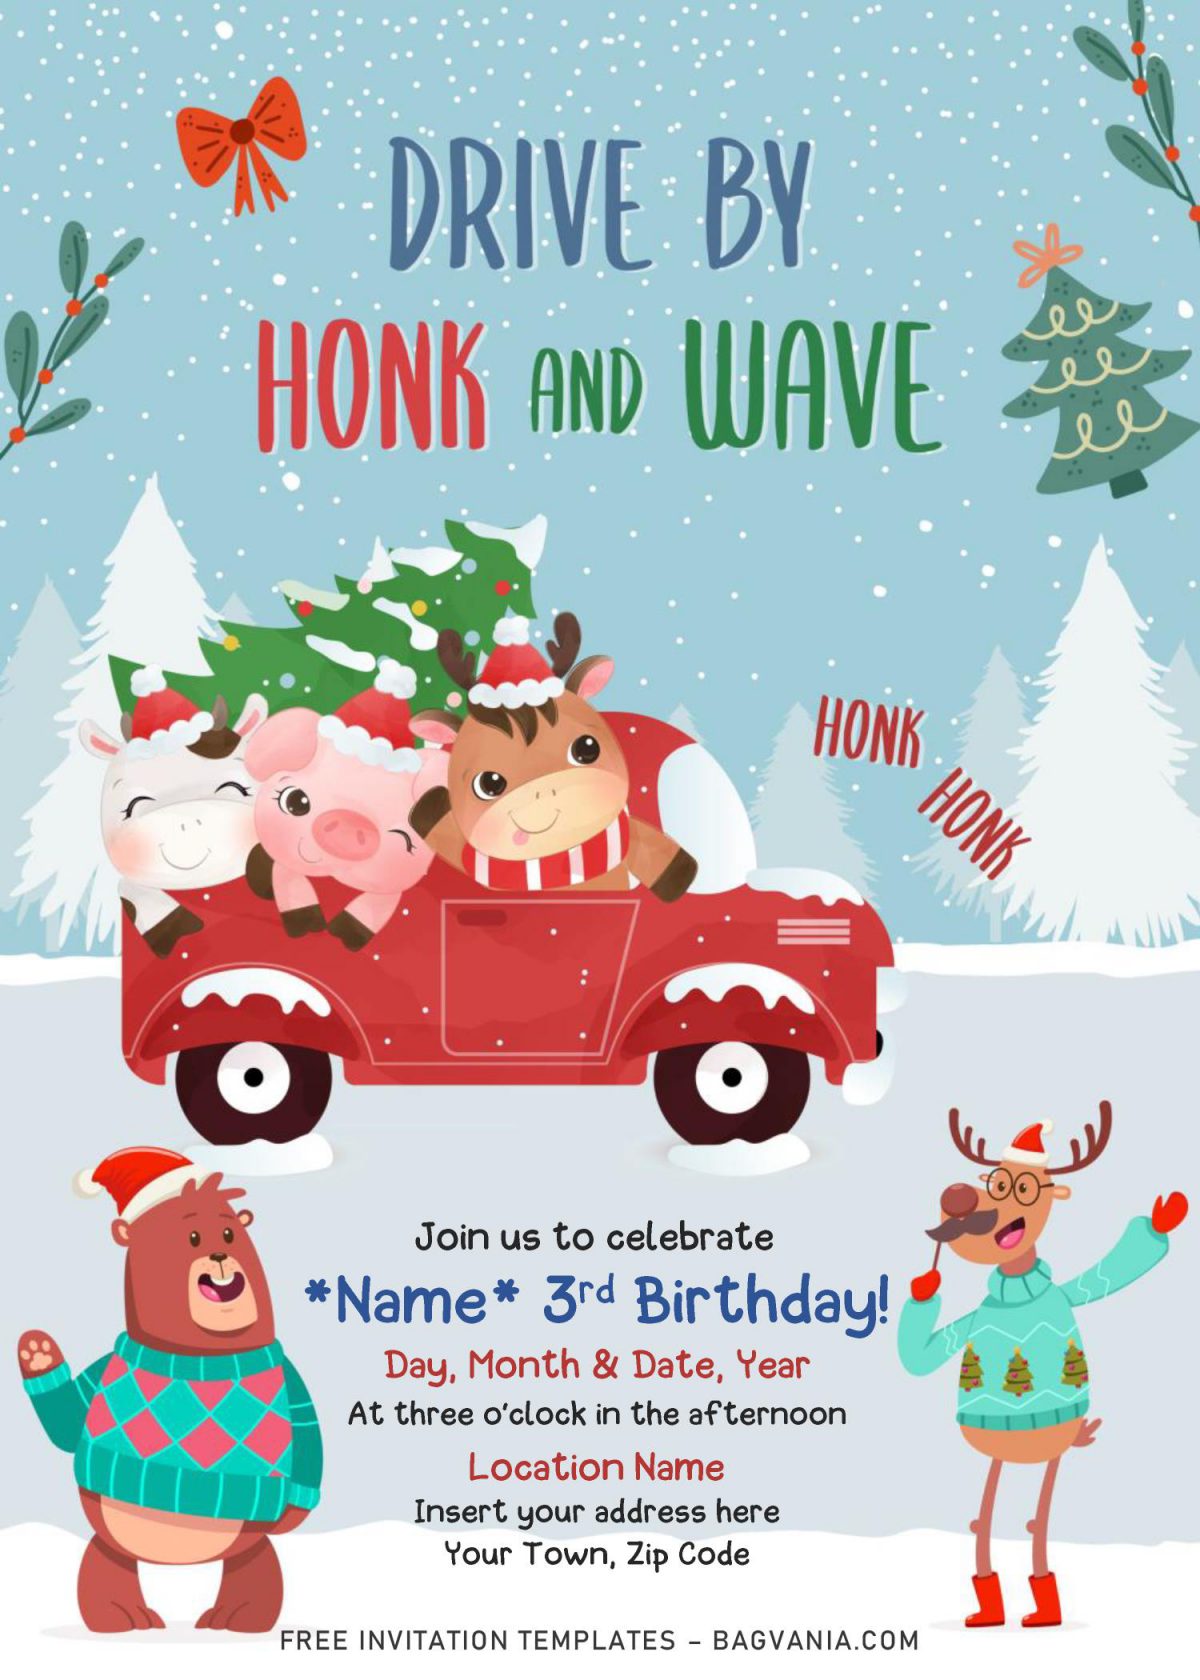 Free Winter Red Truck Drive By Birthday Party Invitation Templates For Word and has cute animals wearing sweater and hats